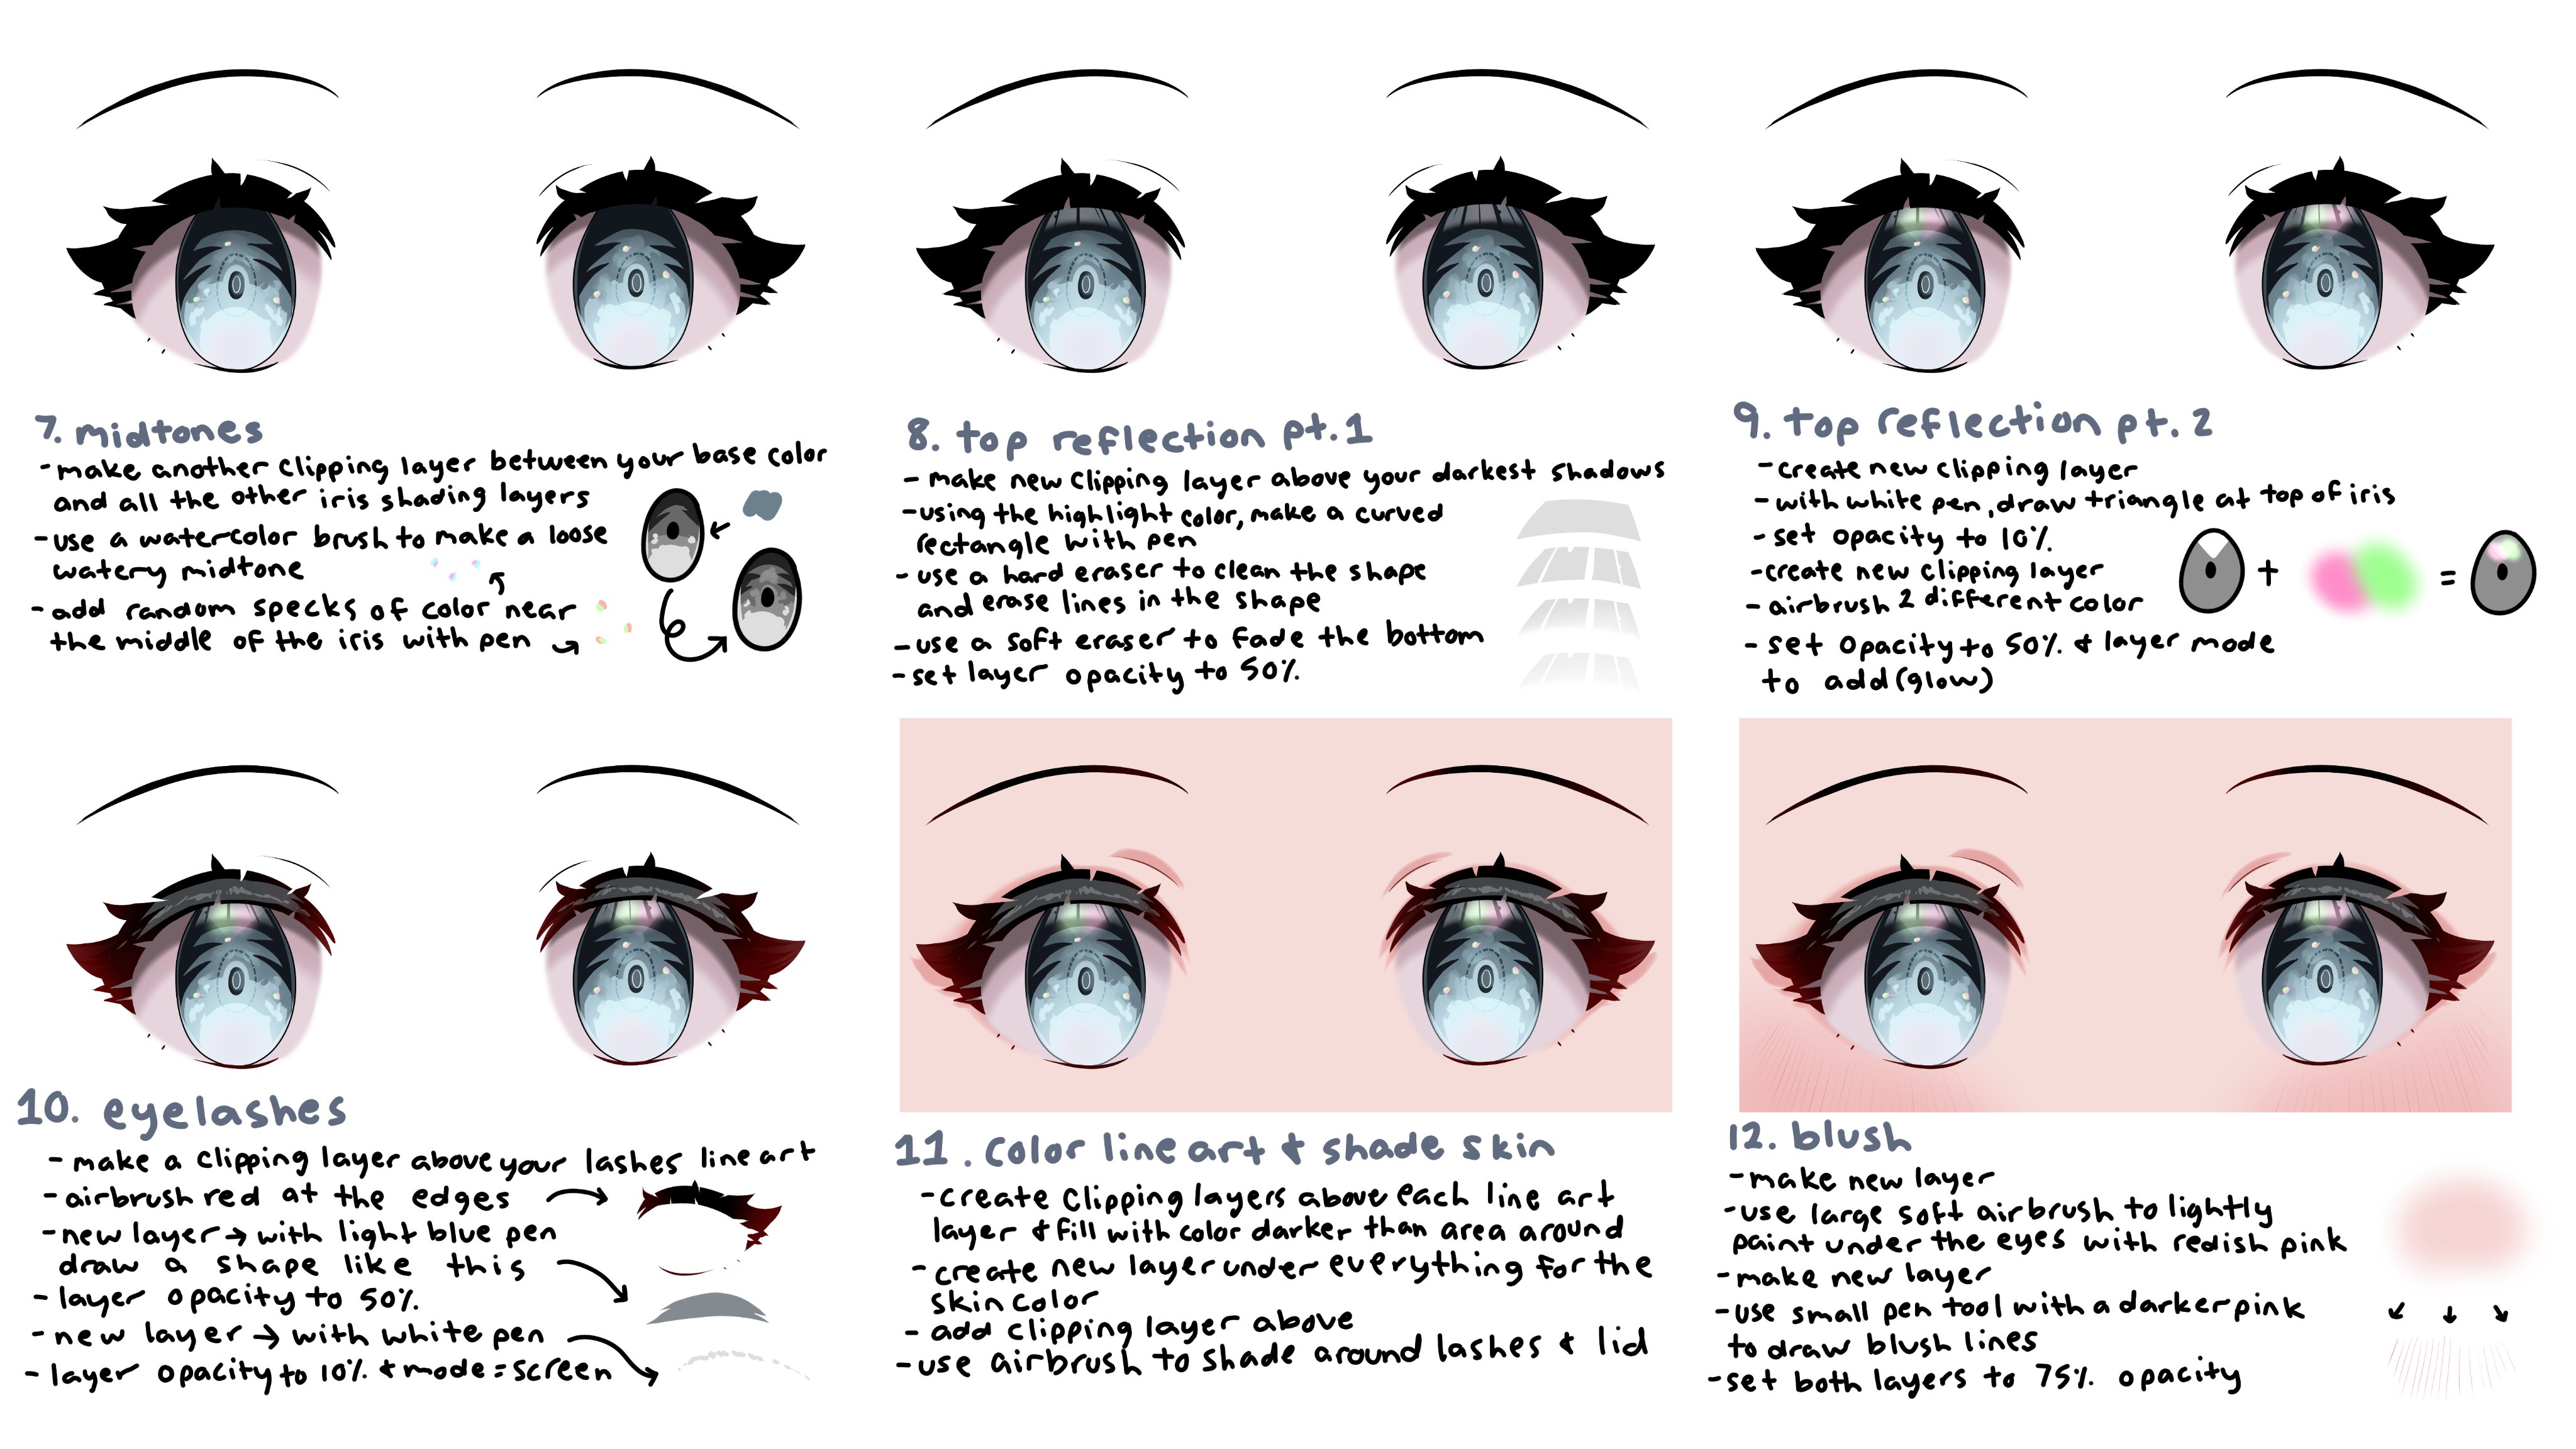 nootie 🐧 on X: here is a tutorial on how i draw anime eyes! feel